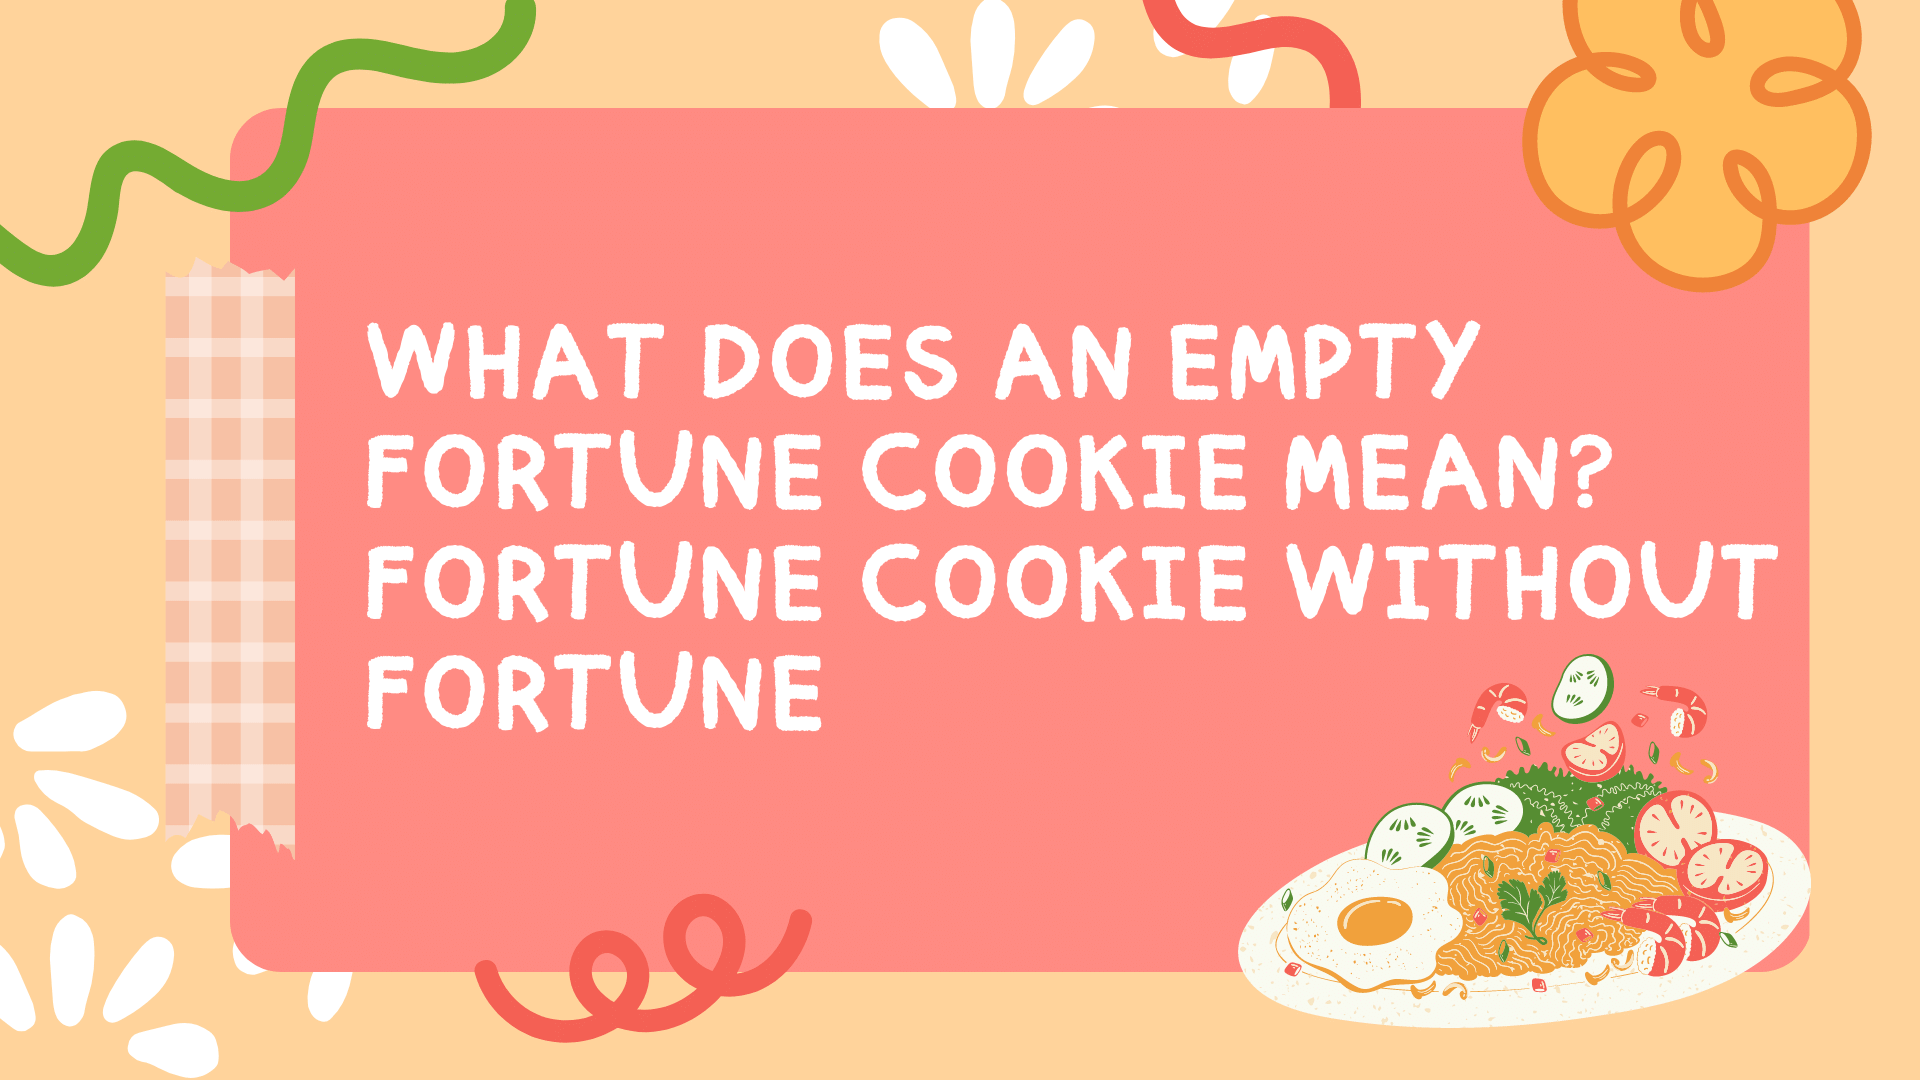 What Does an Empty Fortune Cookie Mean? Fortune Cookie without Fortune